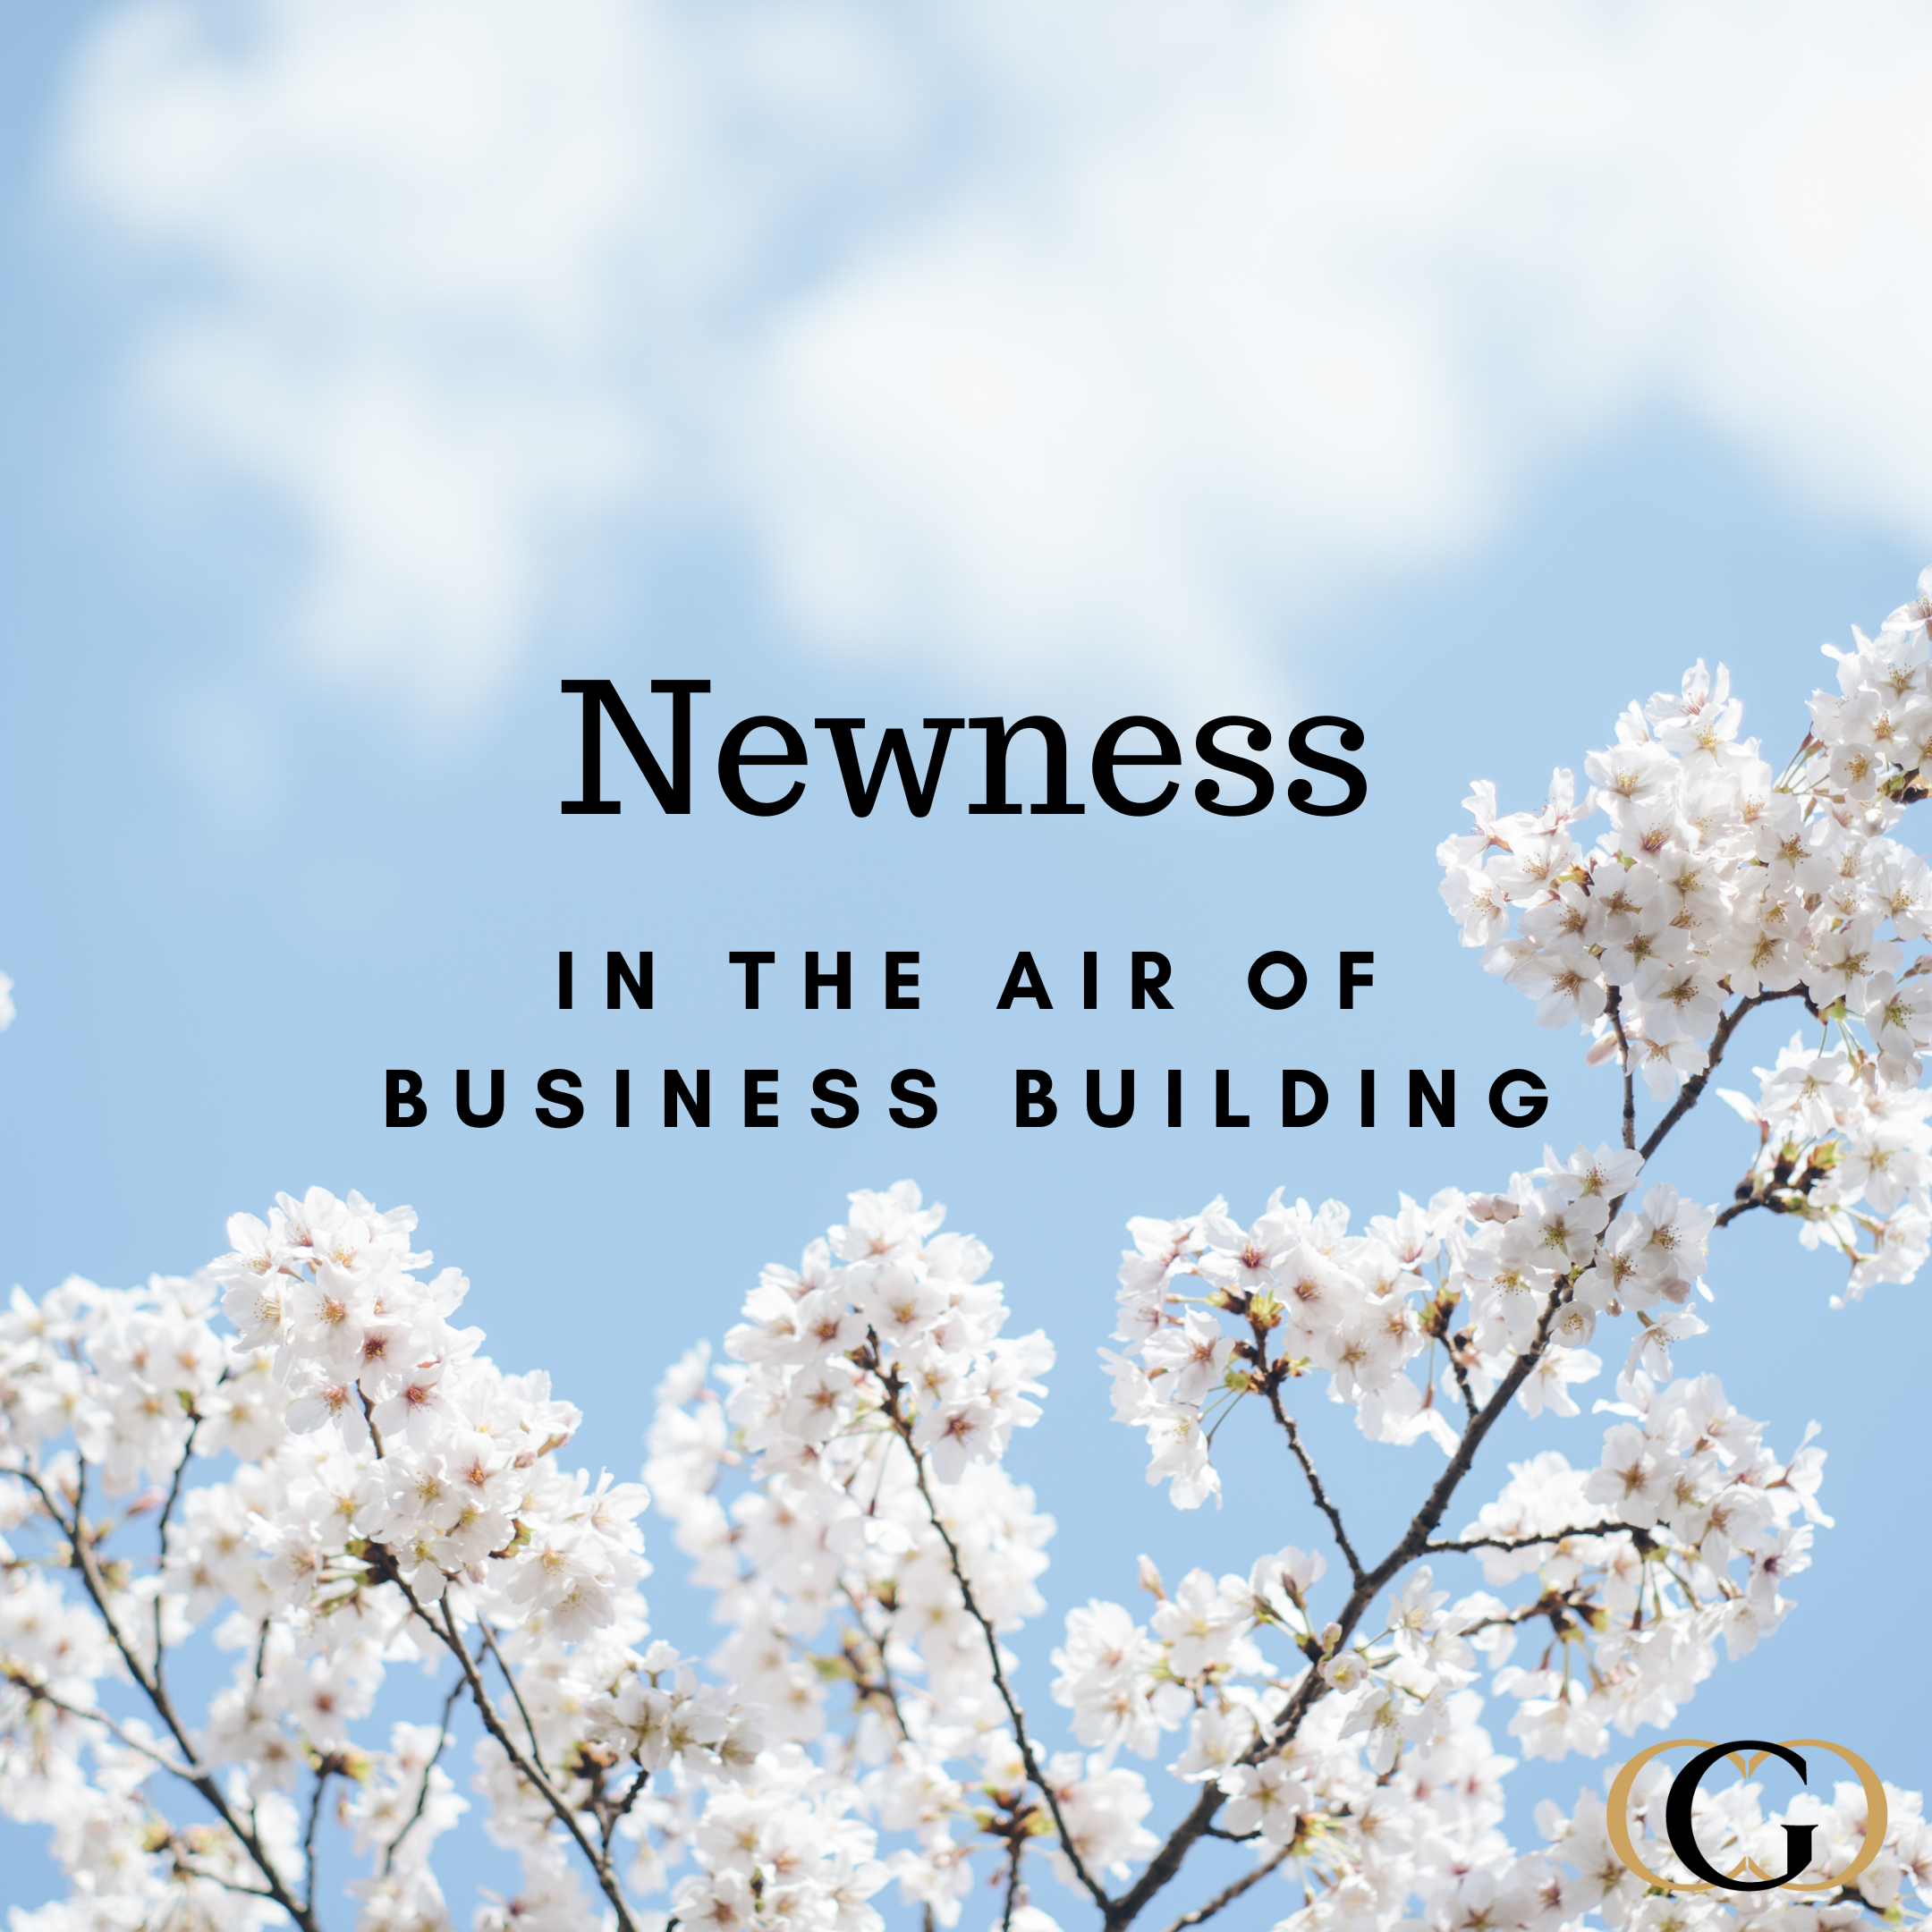 Newness in the Air of Business Building